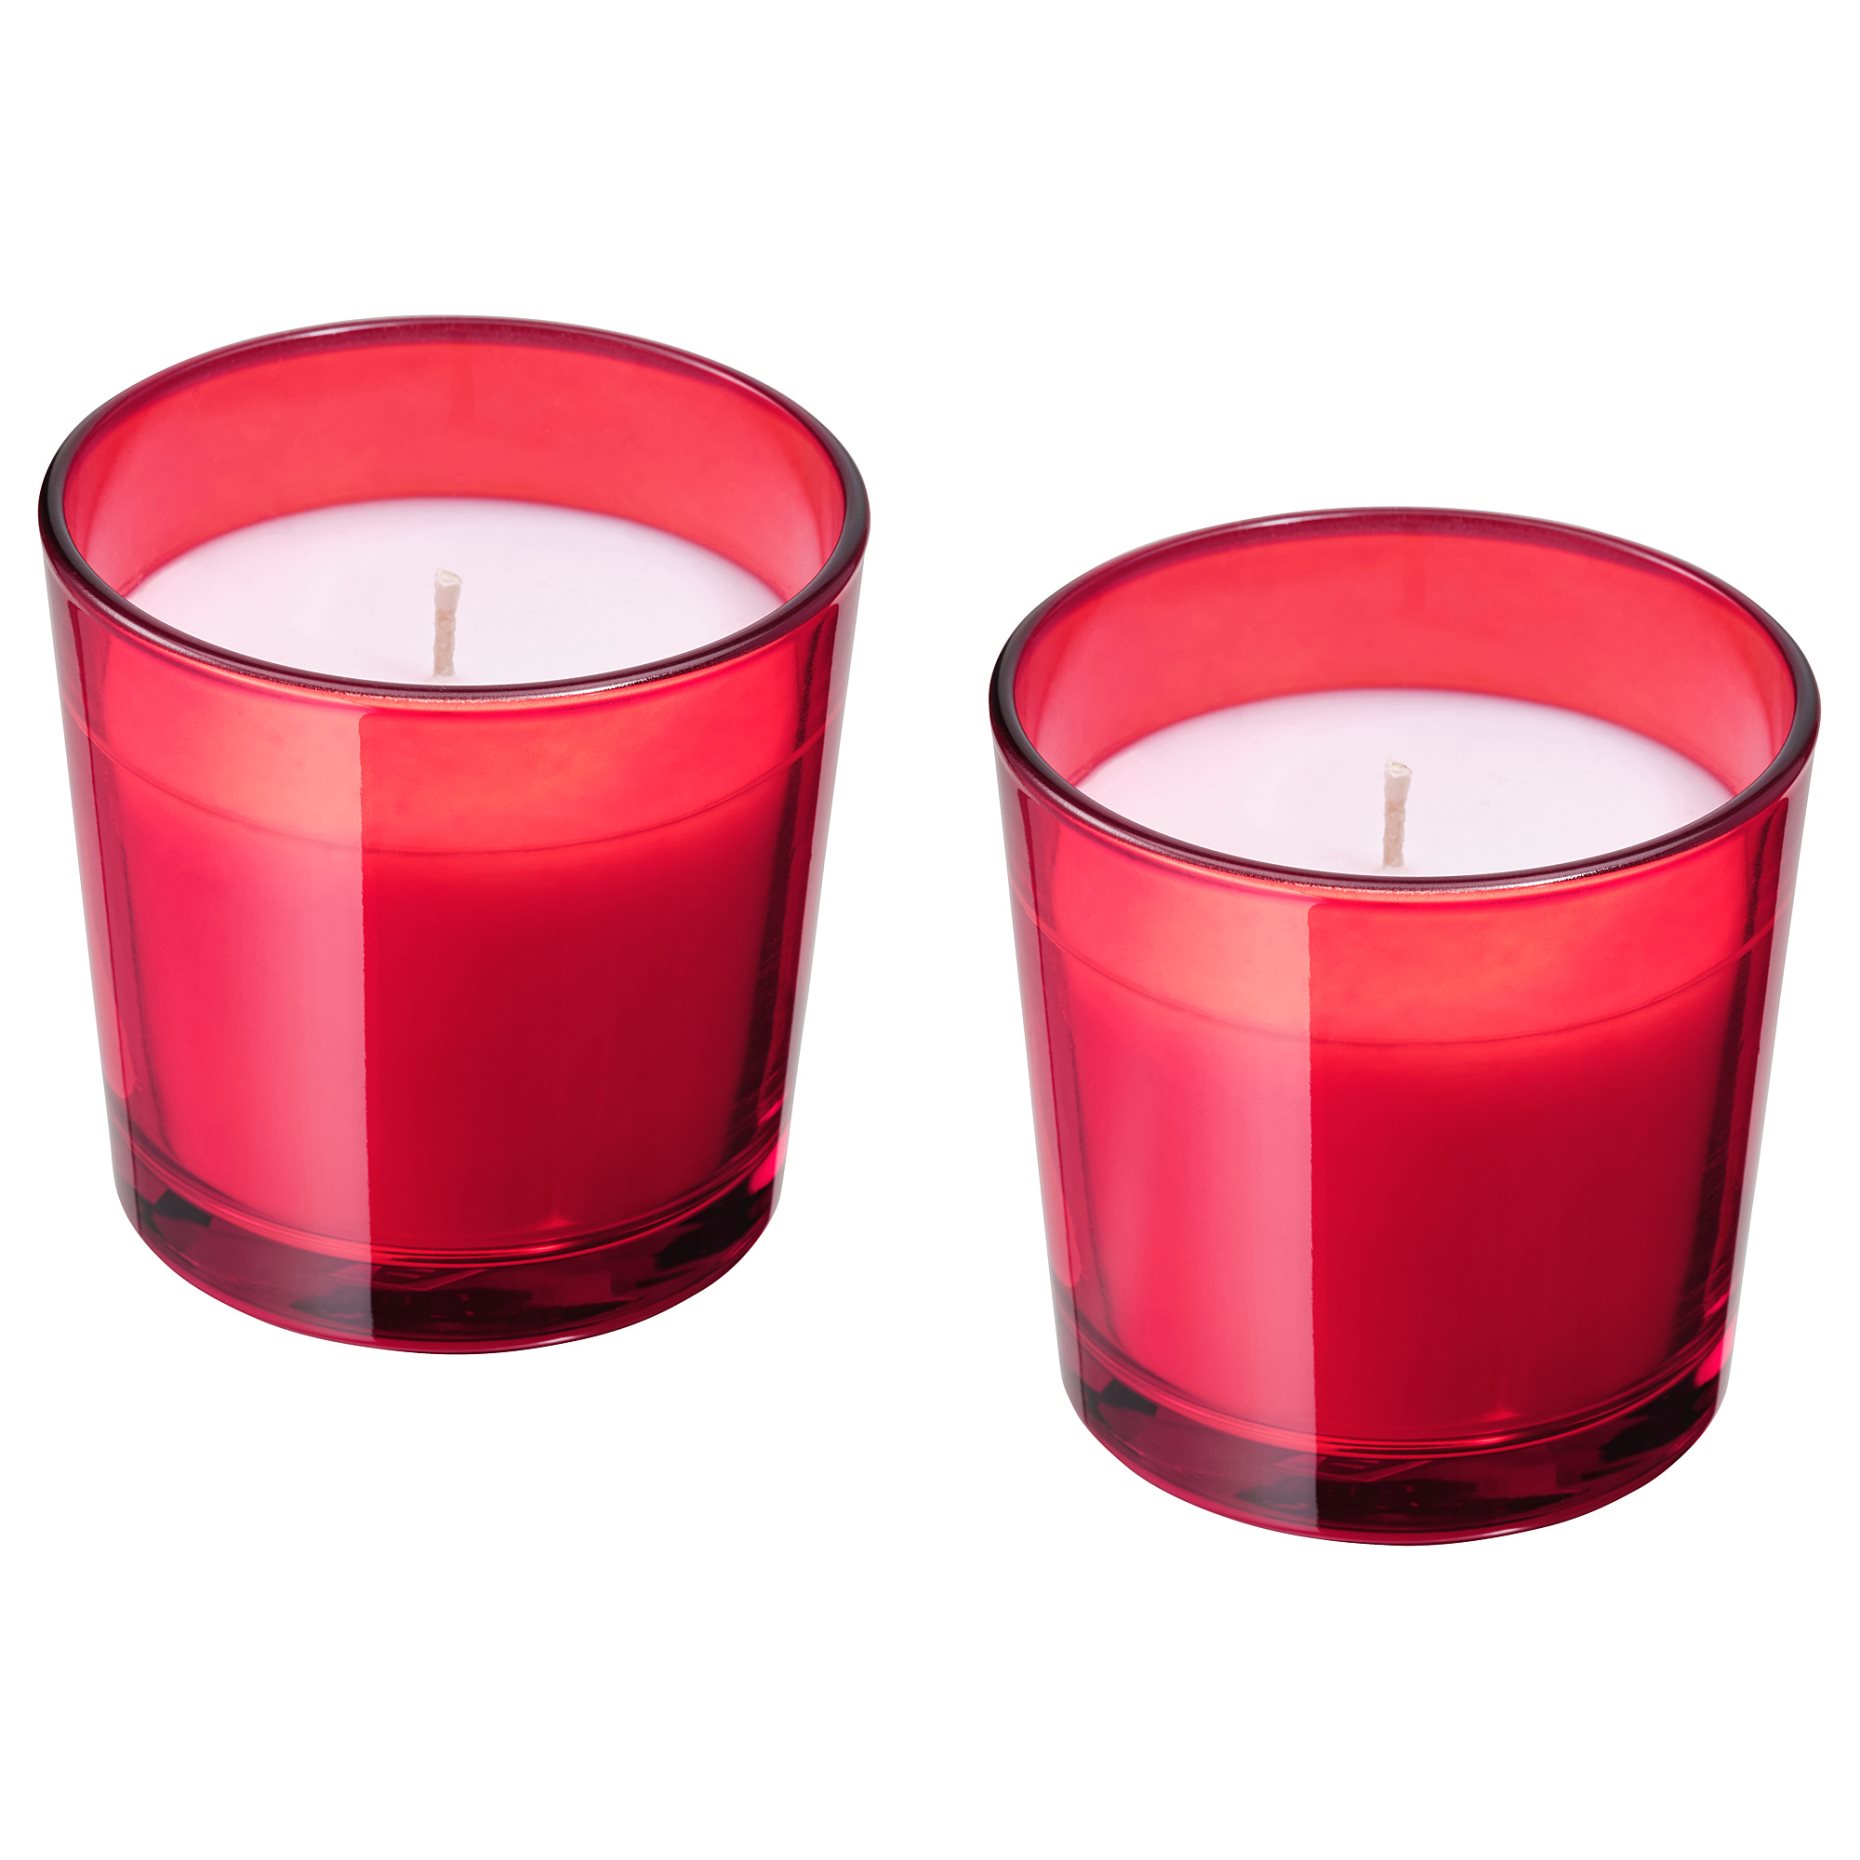 VINTERFINT, scented candle in glass/five spices of winter/2 pack, 25 hr, 705.245.52